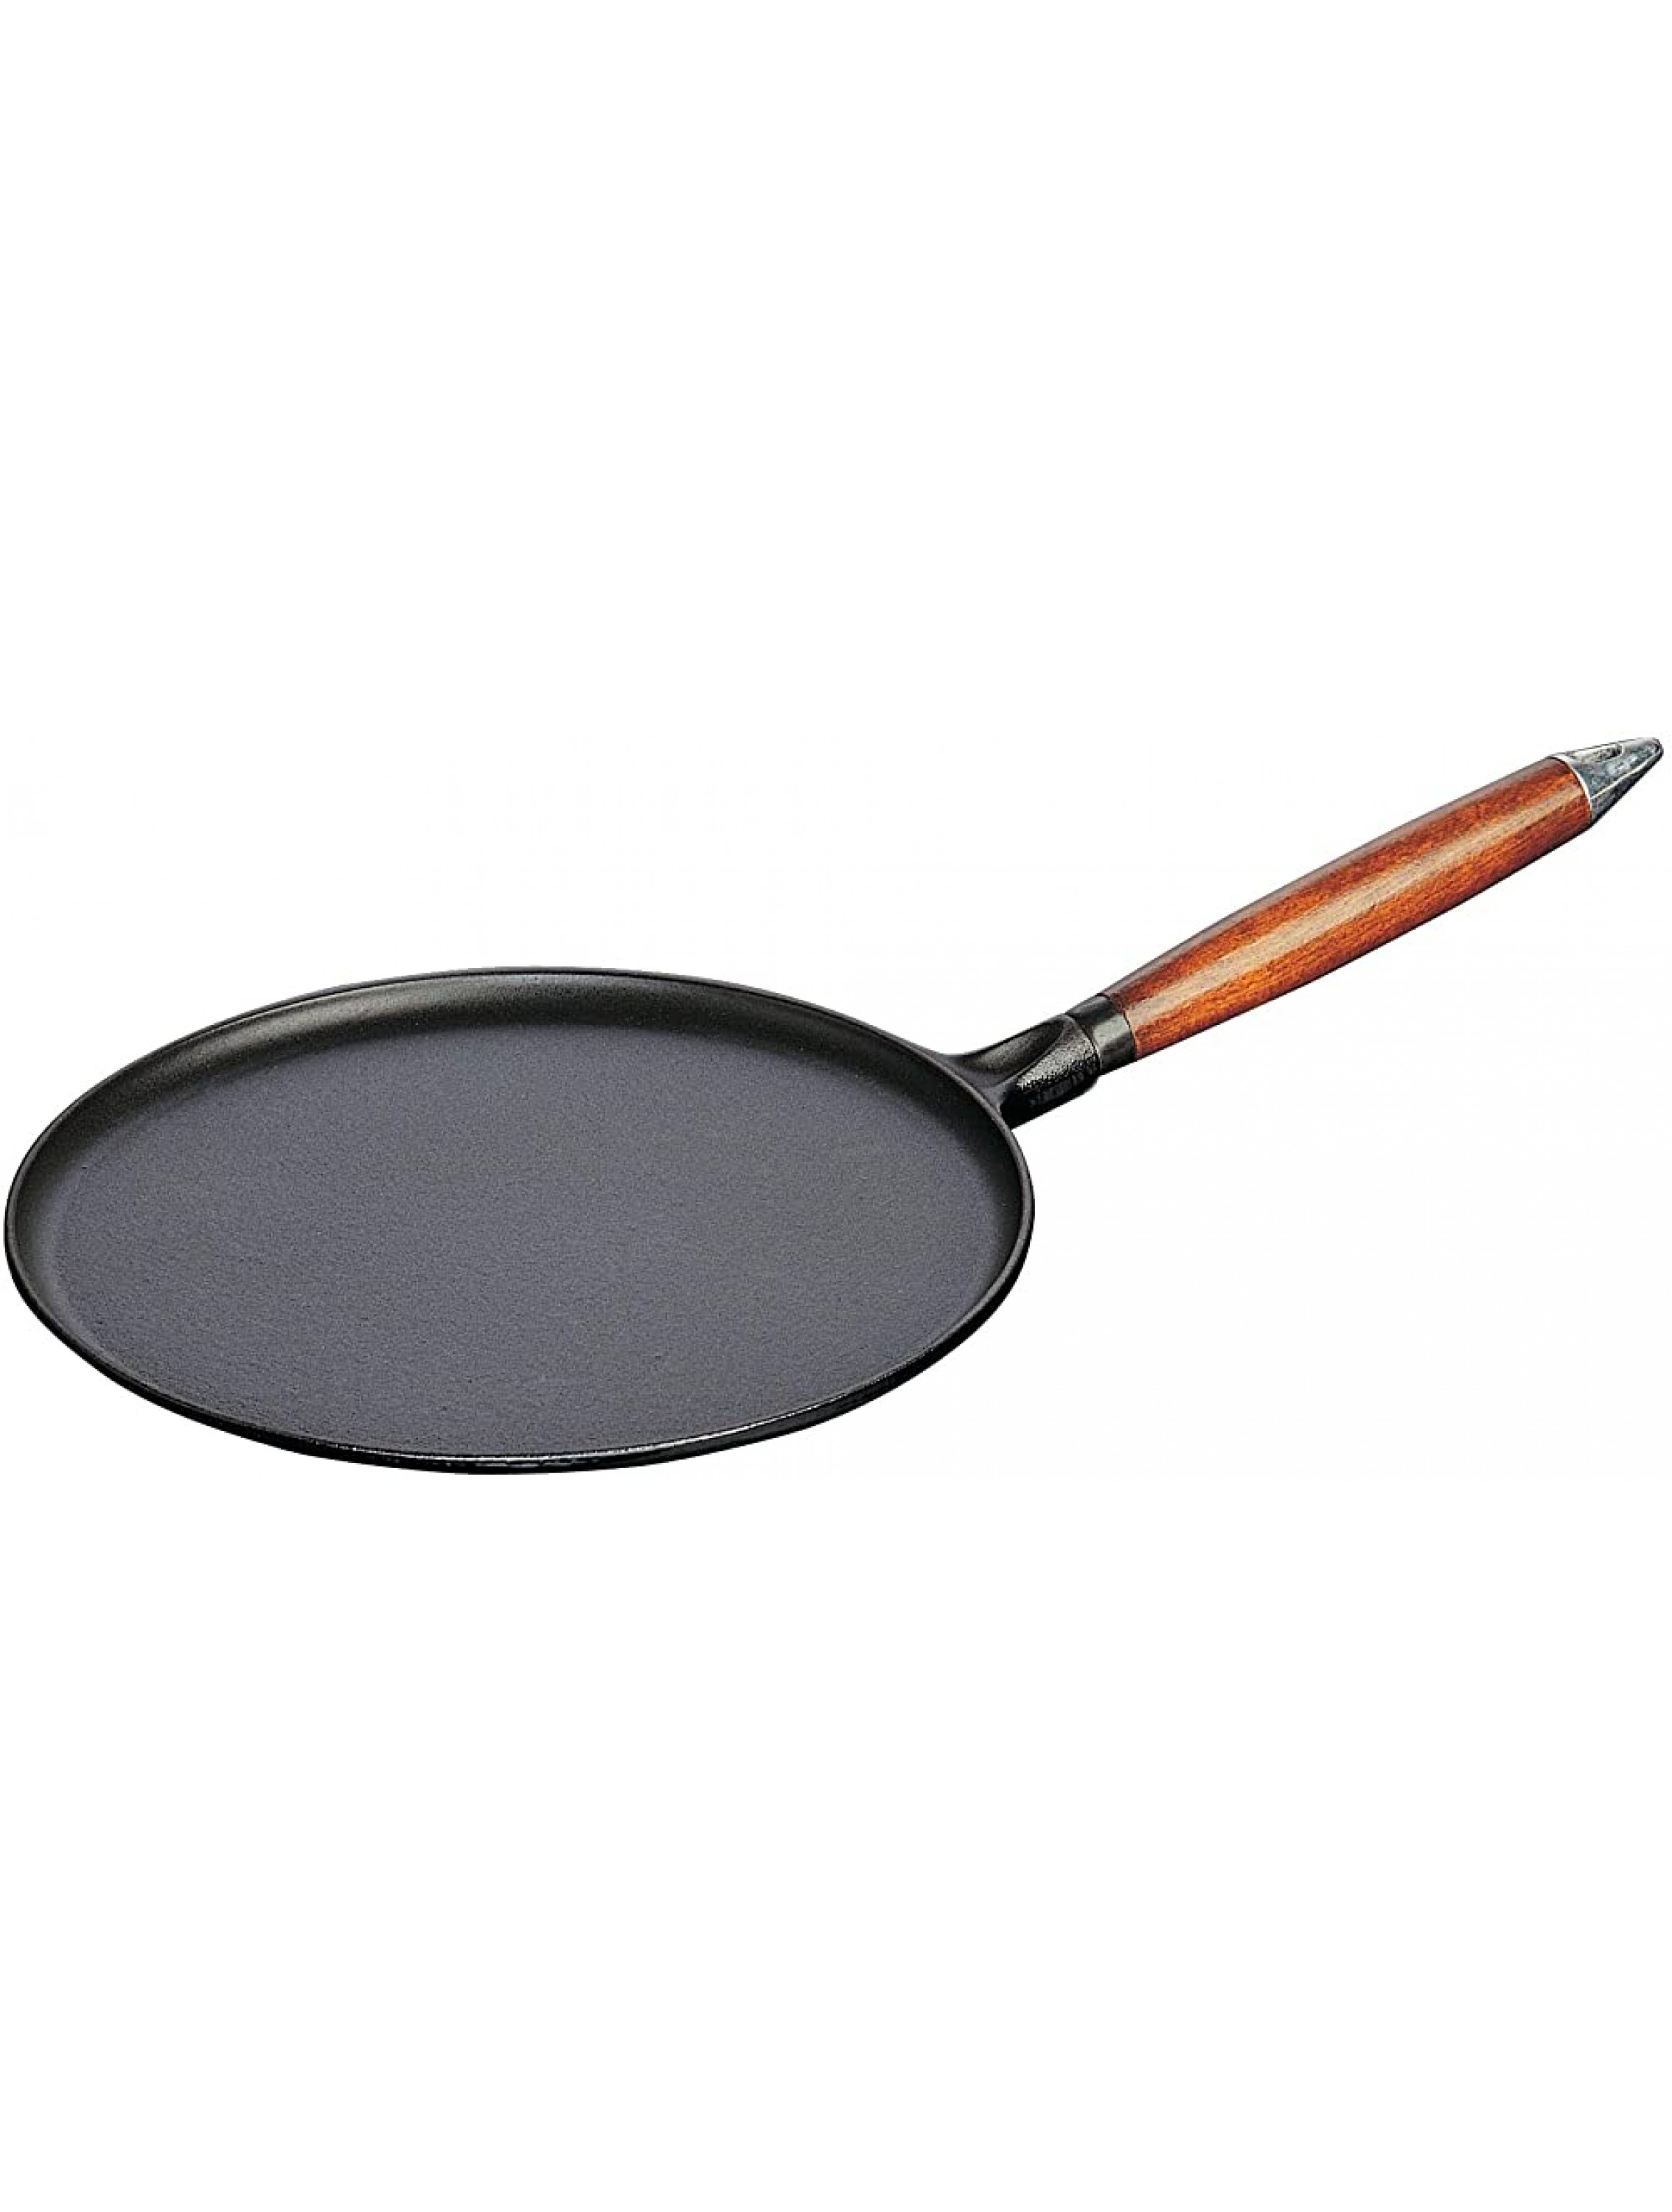 Staub Cast Iron 11-inch Crepe Pan with Spreader & Spatula Matte Black Made in France - B9X60Q3XV